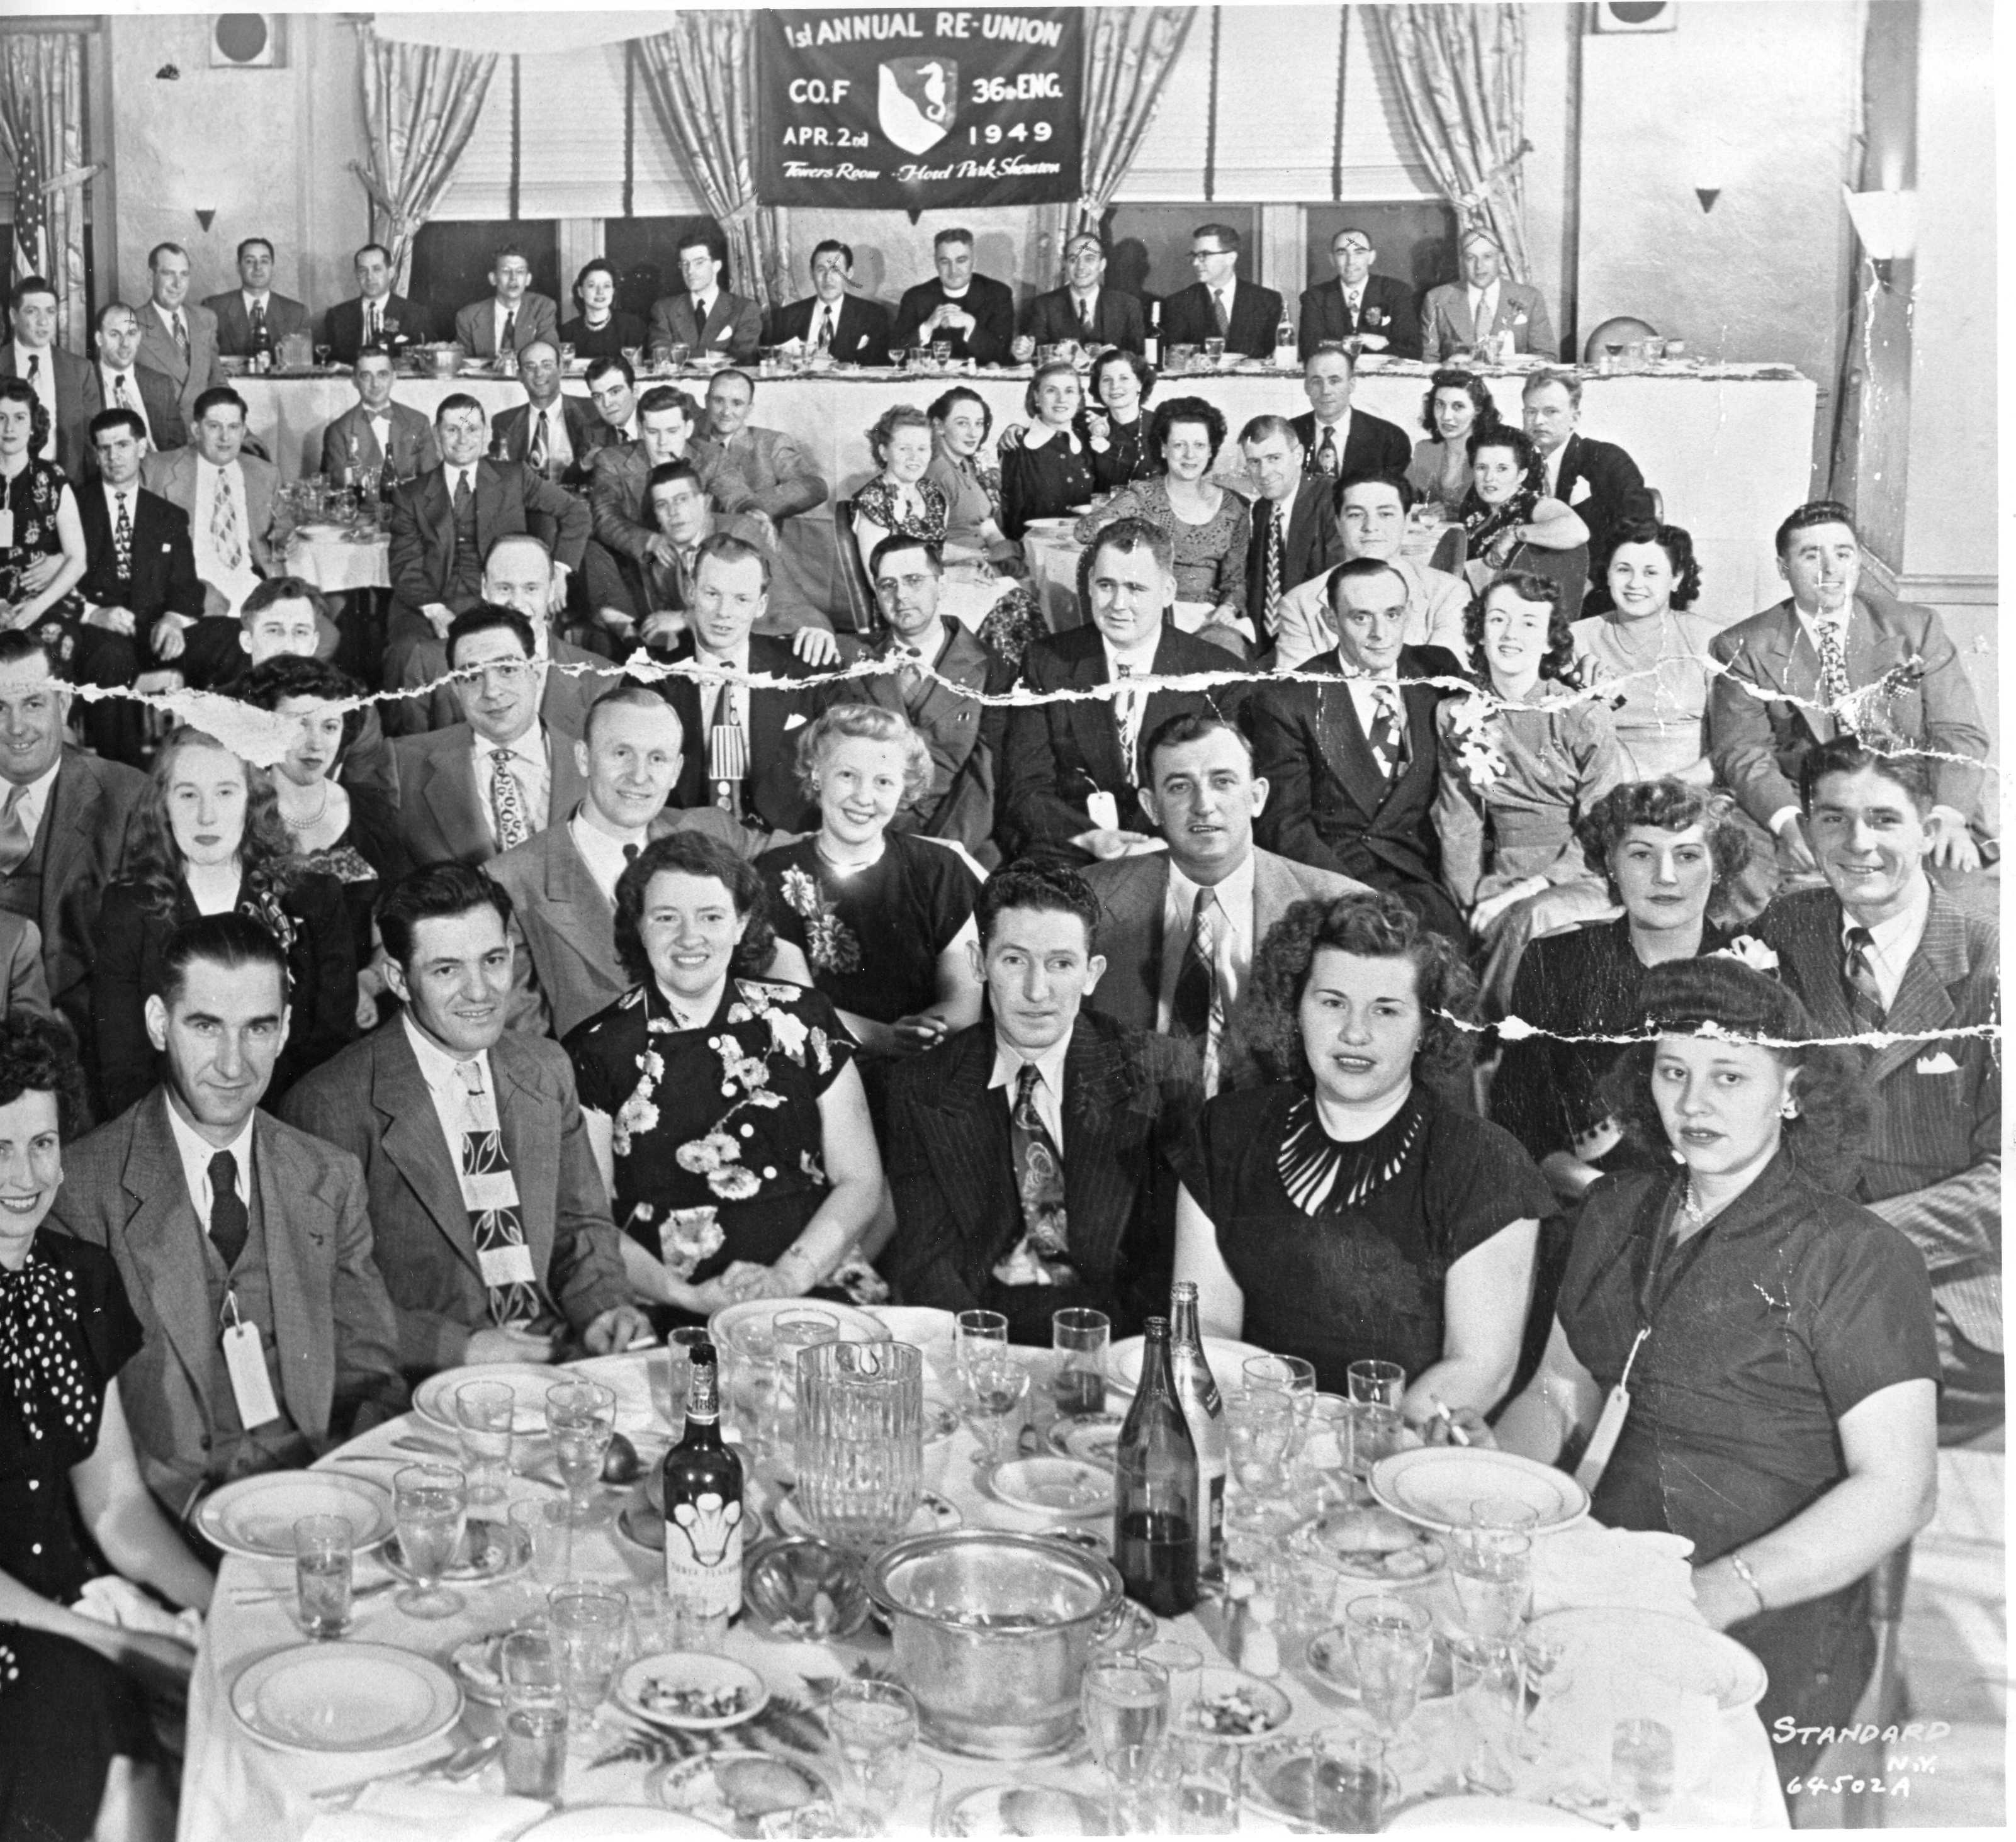 First Annual Reunion - Co F 36th Eng - April 1949002